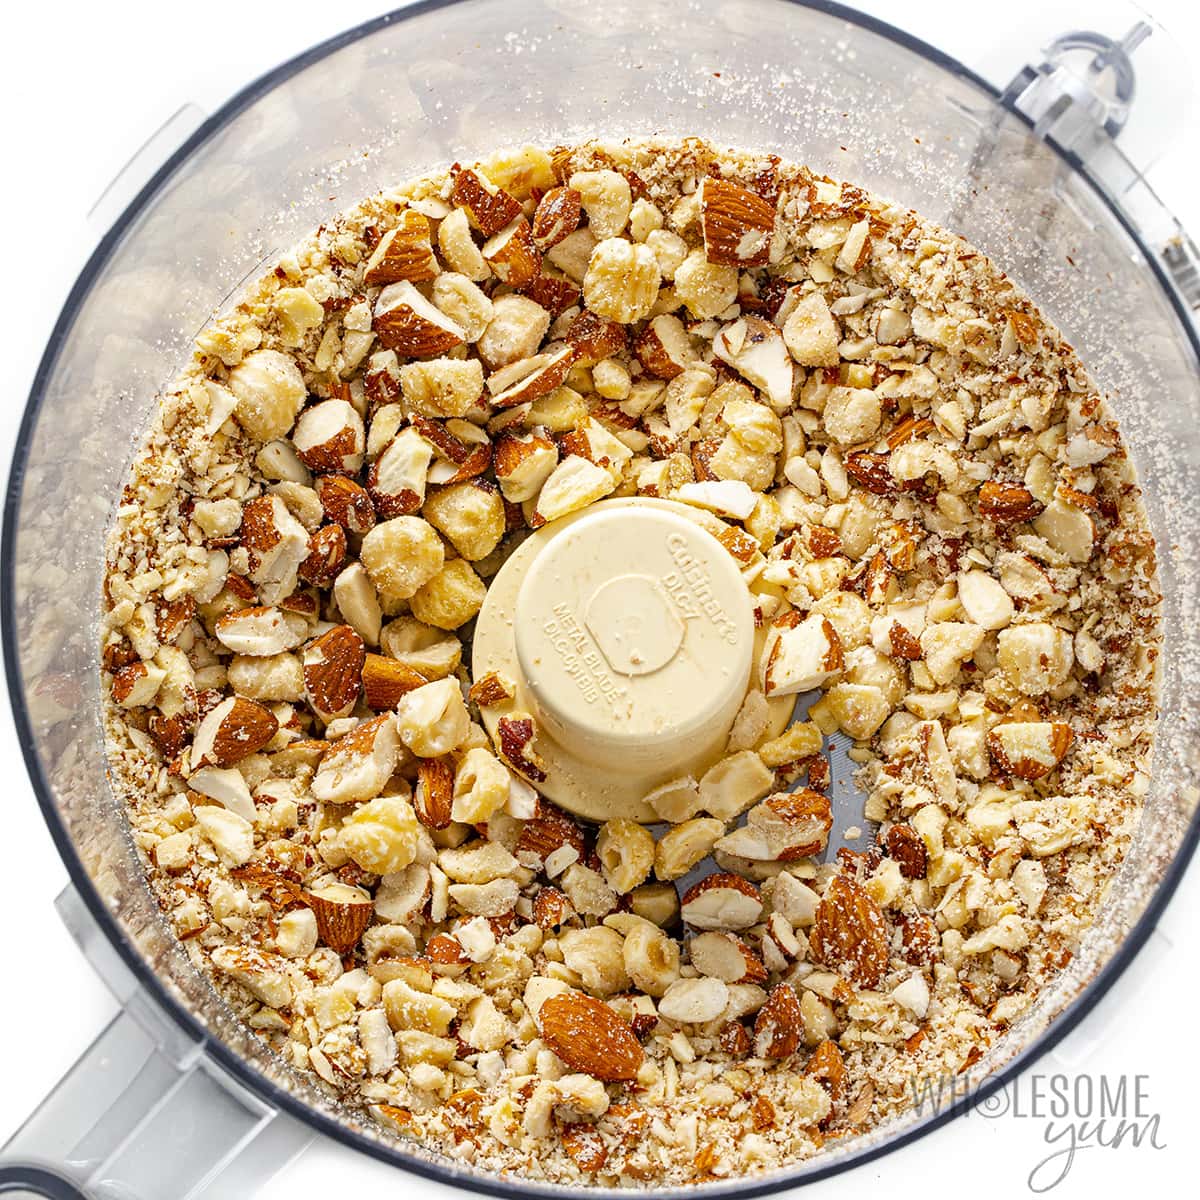 Almonds and hazelnuts pulsed in a food processor.